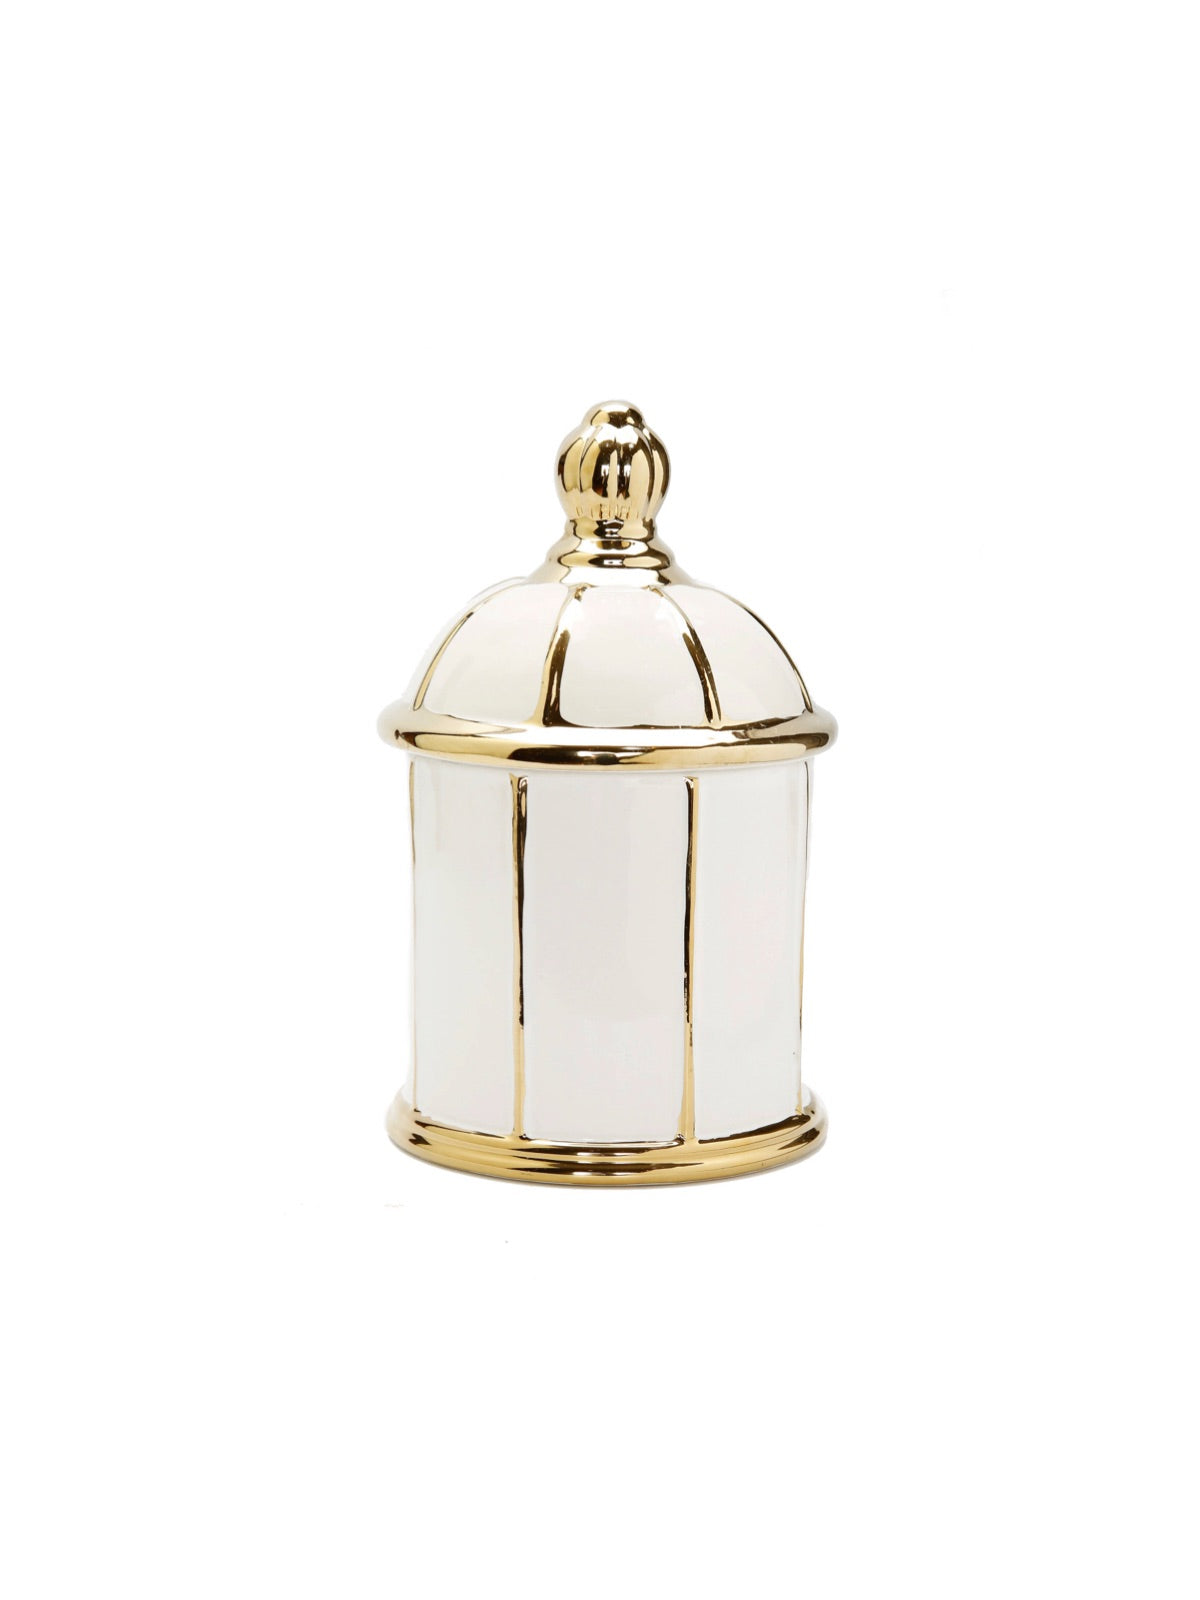 8H white and gold striped ceramic kitchen jars with dome design lid - KYA Home Decor.